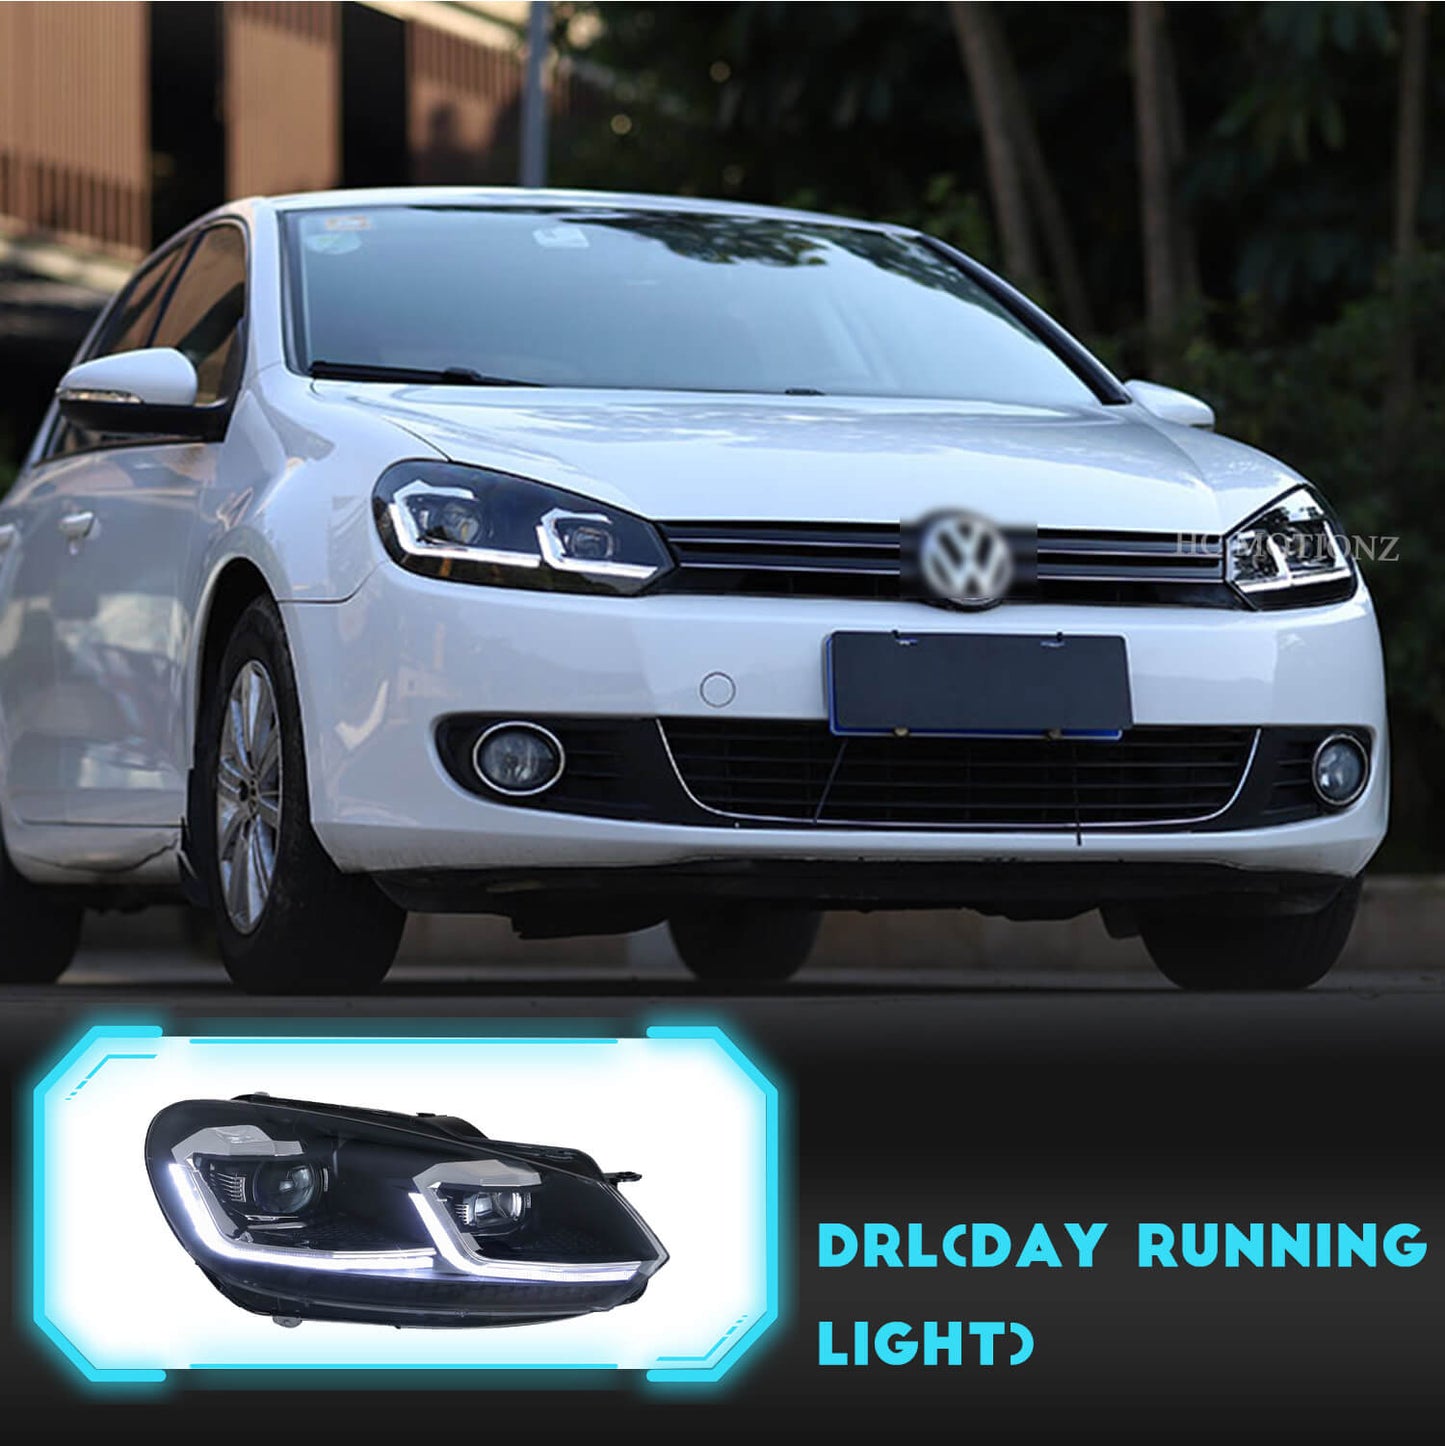 HCMOTION For 2008-2013 VW MK6 Golf 6 Projector Headlights